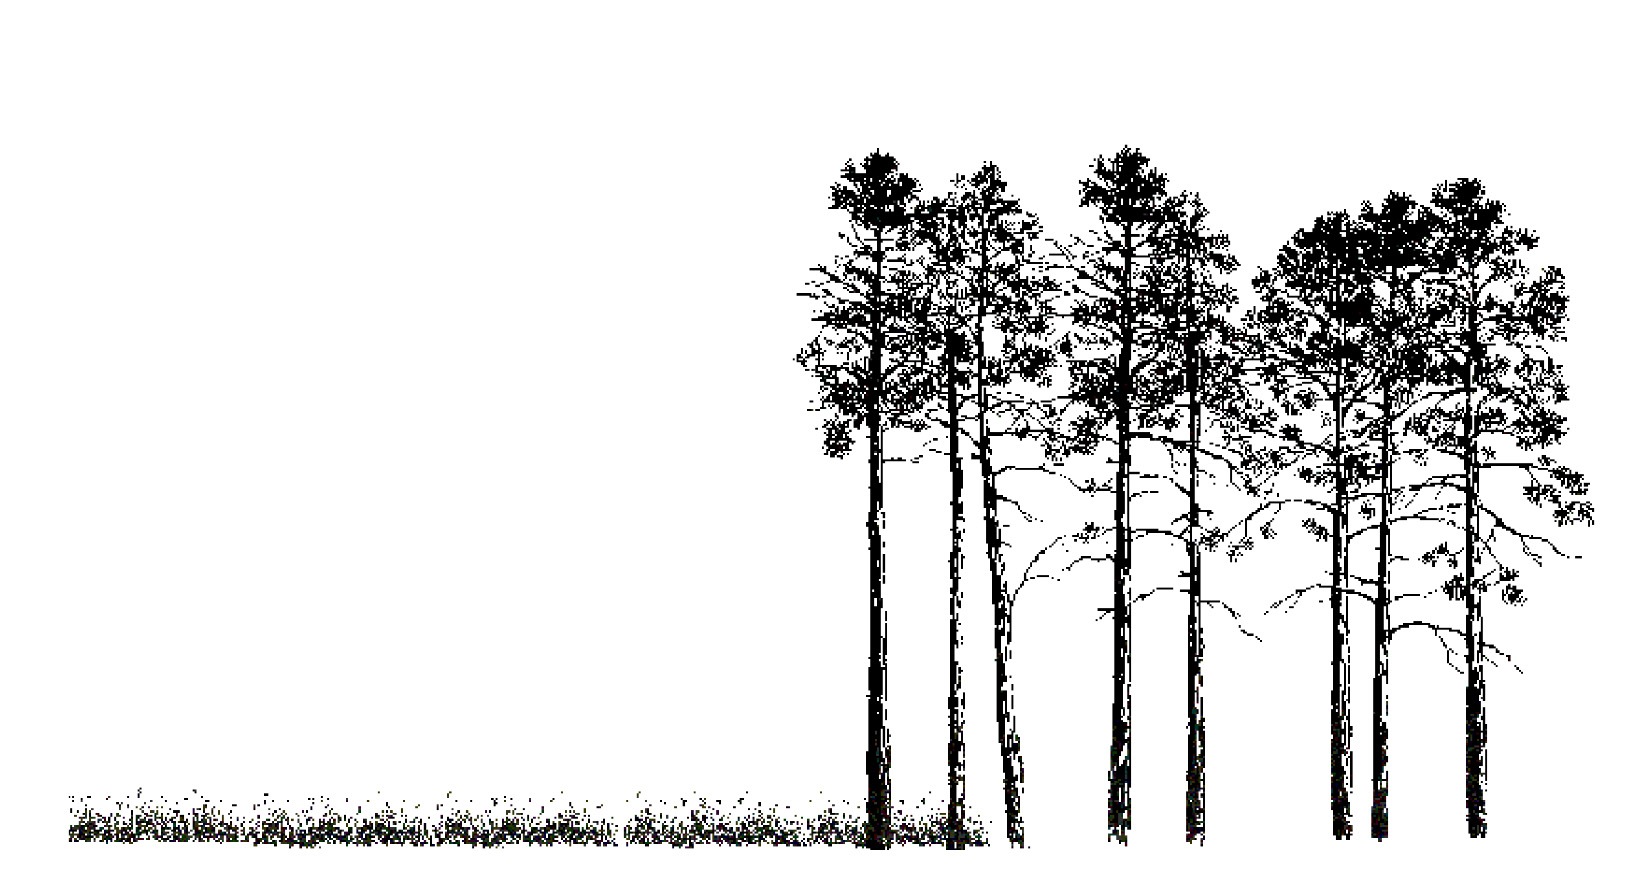 An illustration of a high contrast edge with an area of vegetative structures that leads to a wooded area.